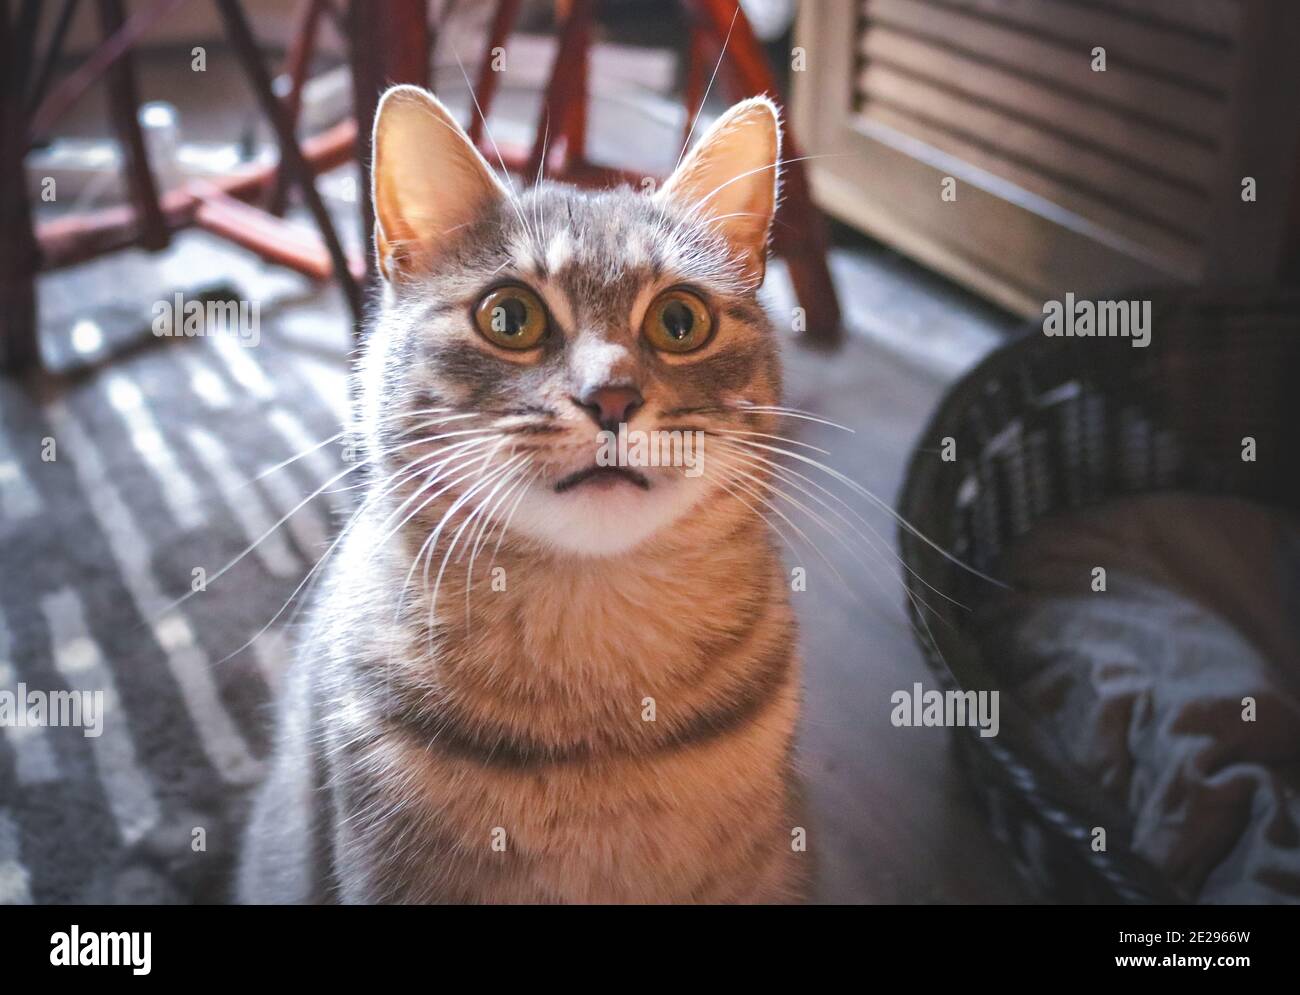 A tabby cat looking up Stock Photo